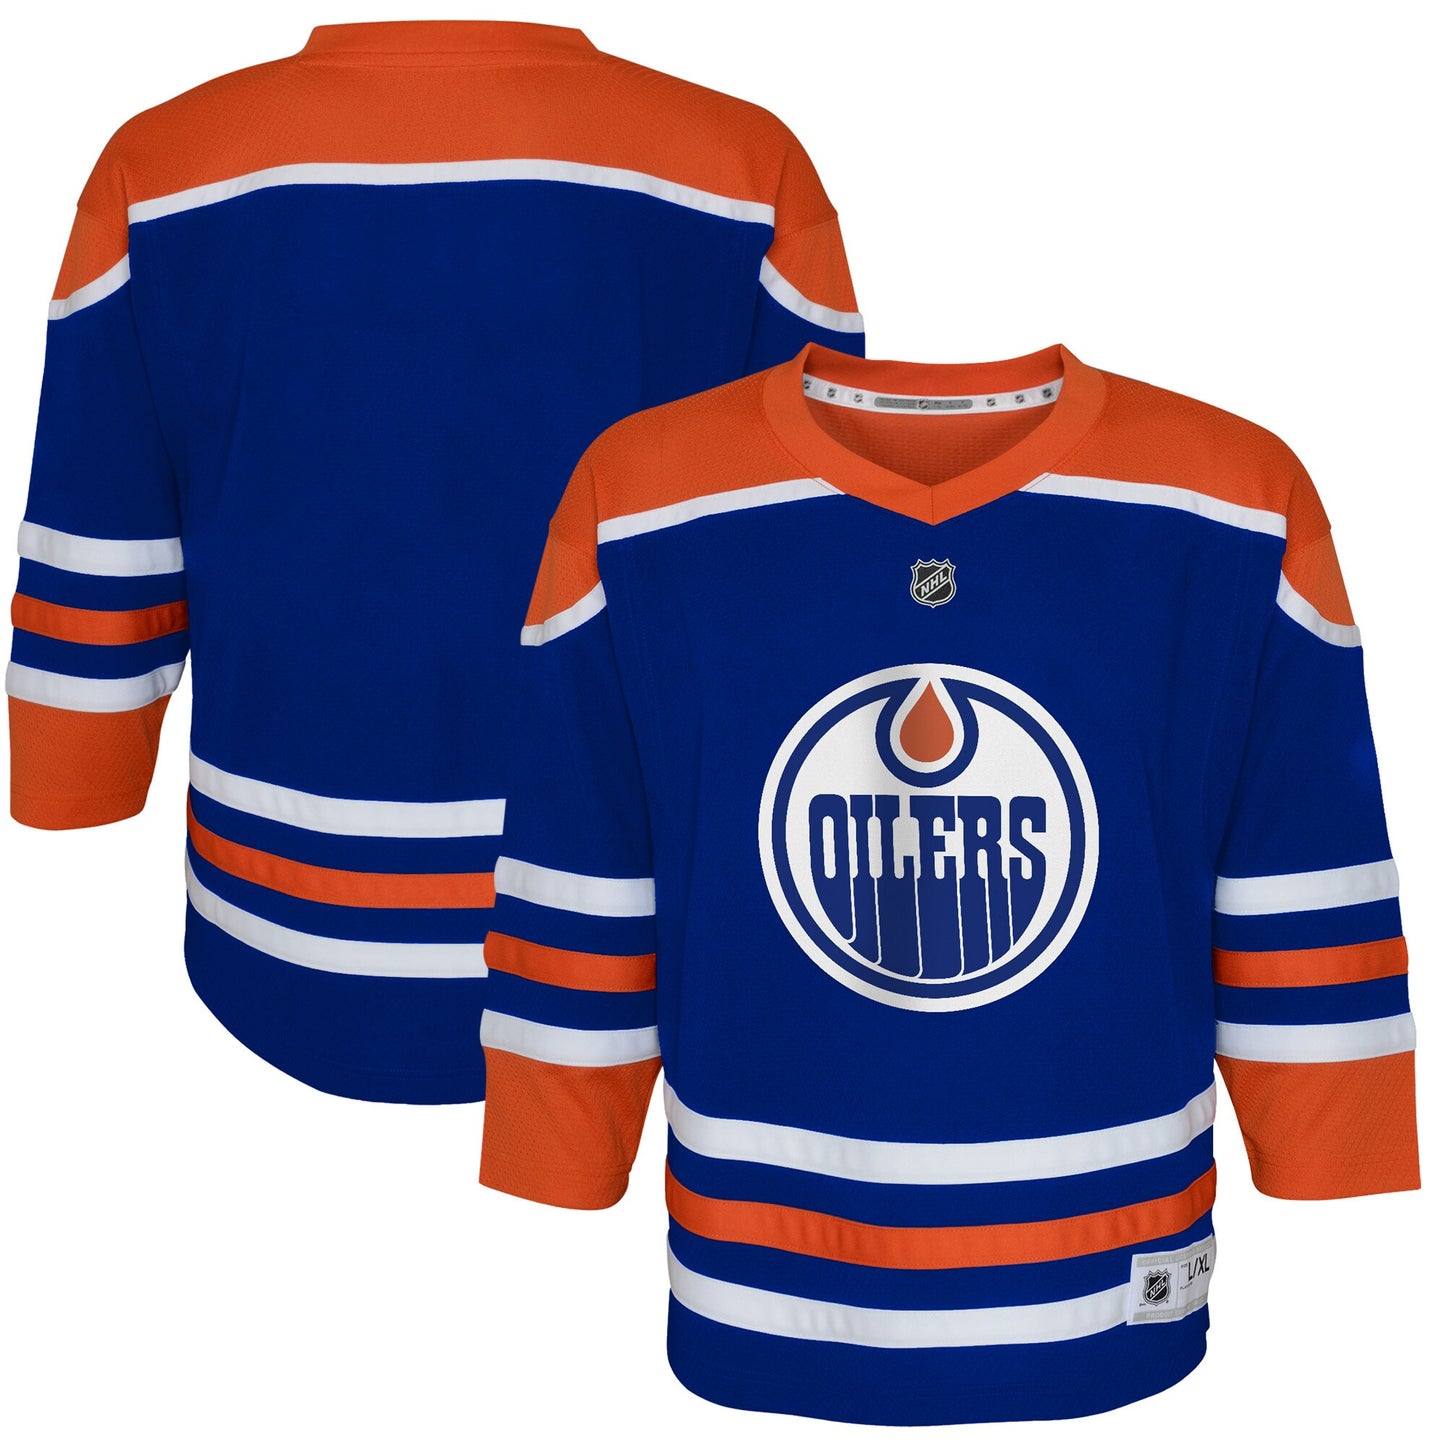 Edmonton Oilers Outerstuff Infant Home Replica Jersey - Royal